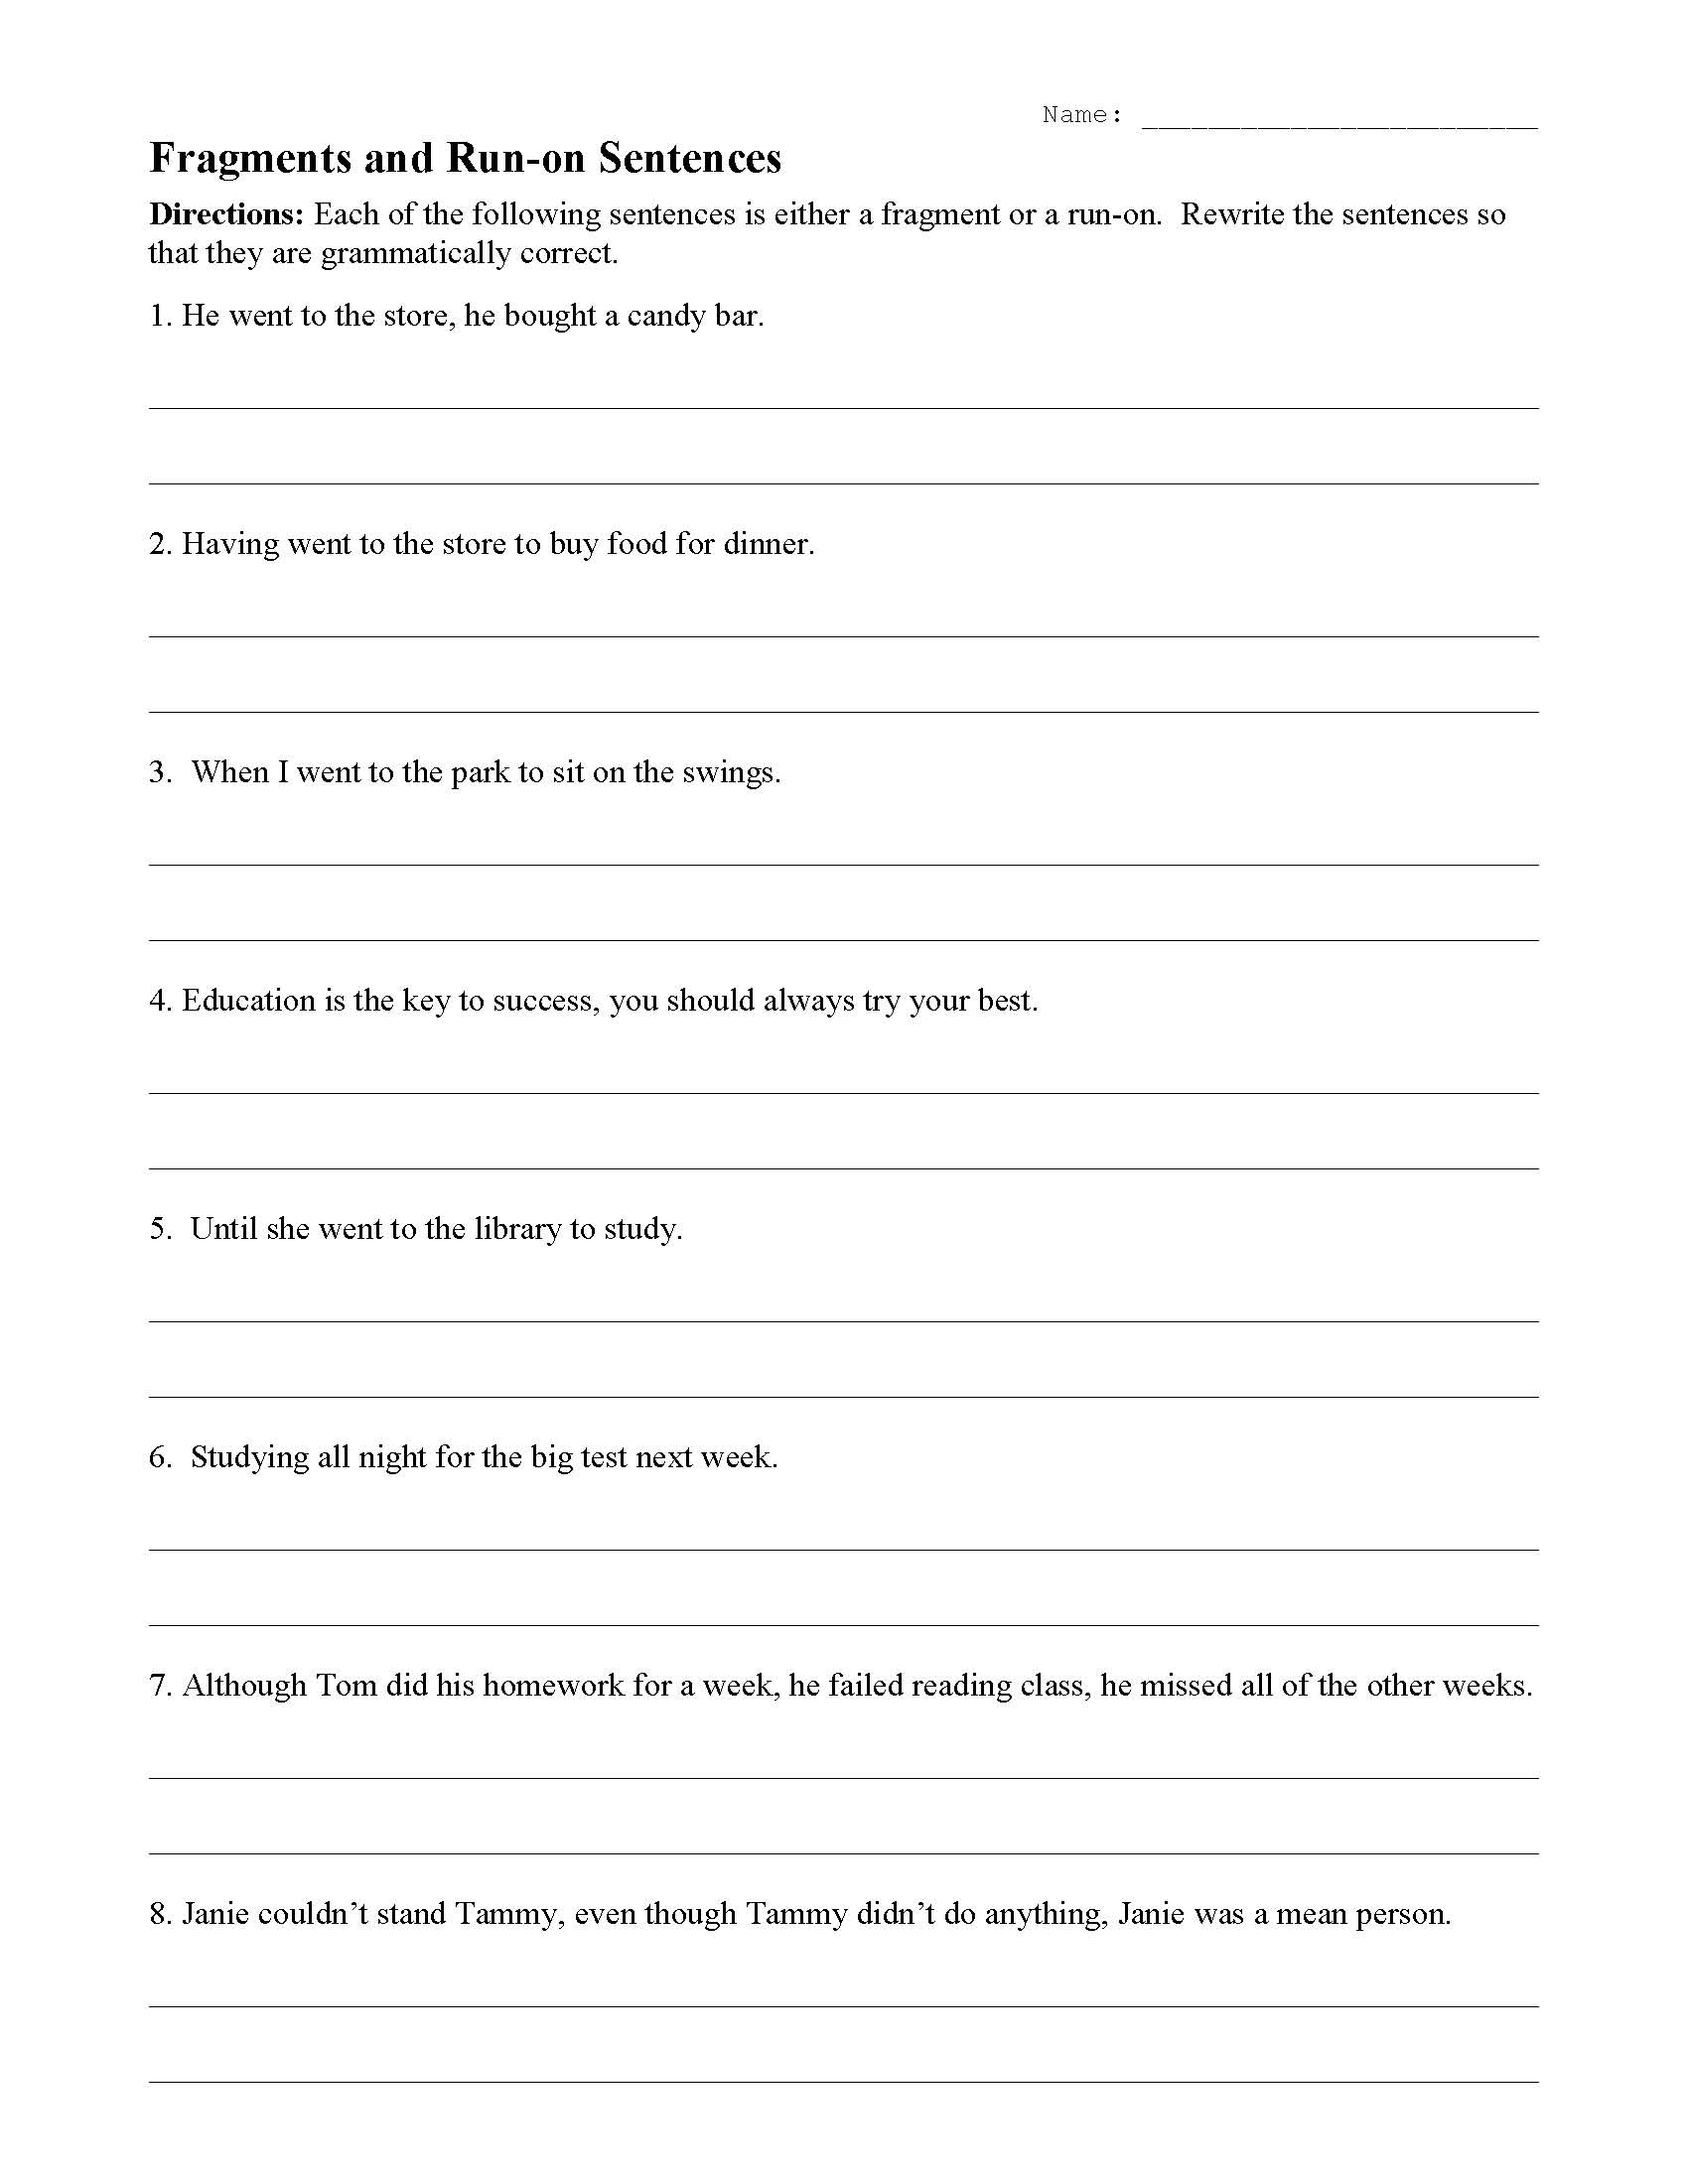 Fragments and Run-On Sentences Worksheet  Sentence Structure Activity Within Run On Sentence Worksheet